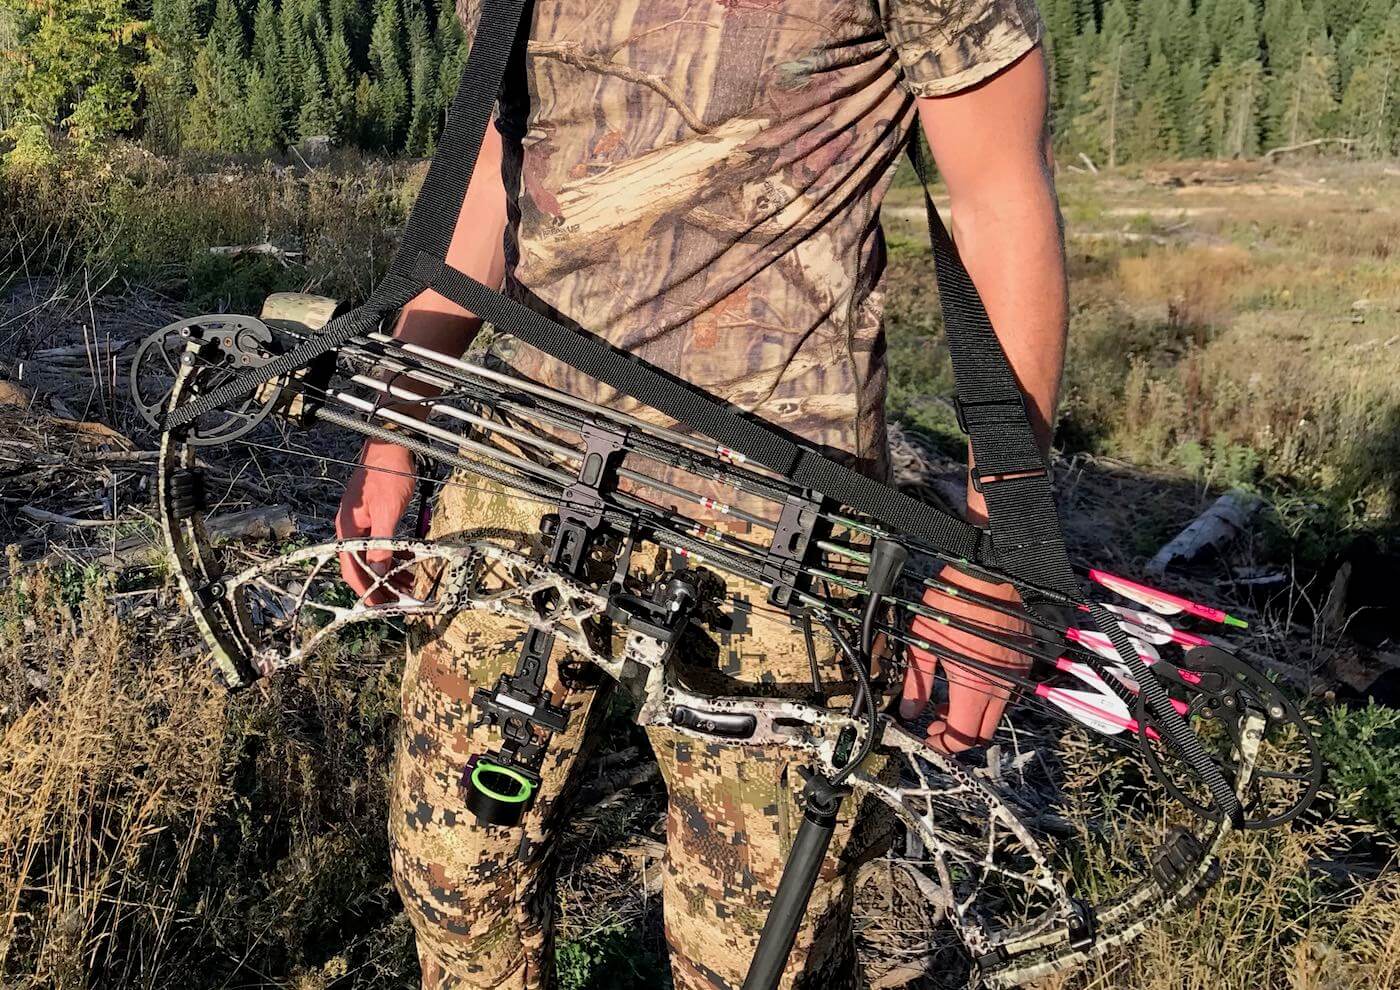 Details about   NEW Black Adjustable Compound Bow Sling-The Bow Strap 